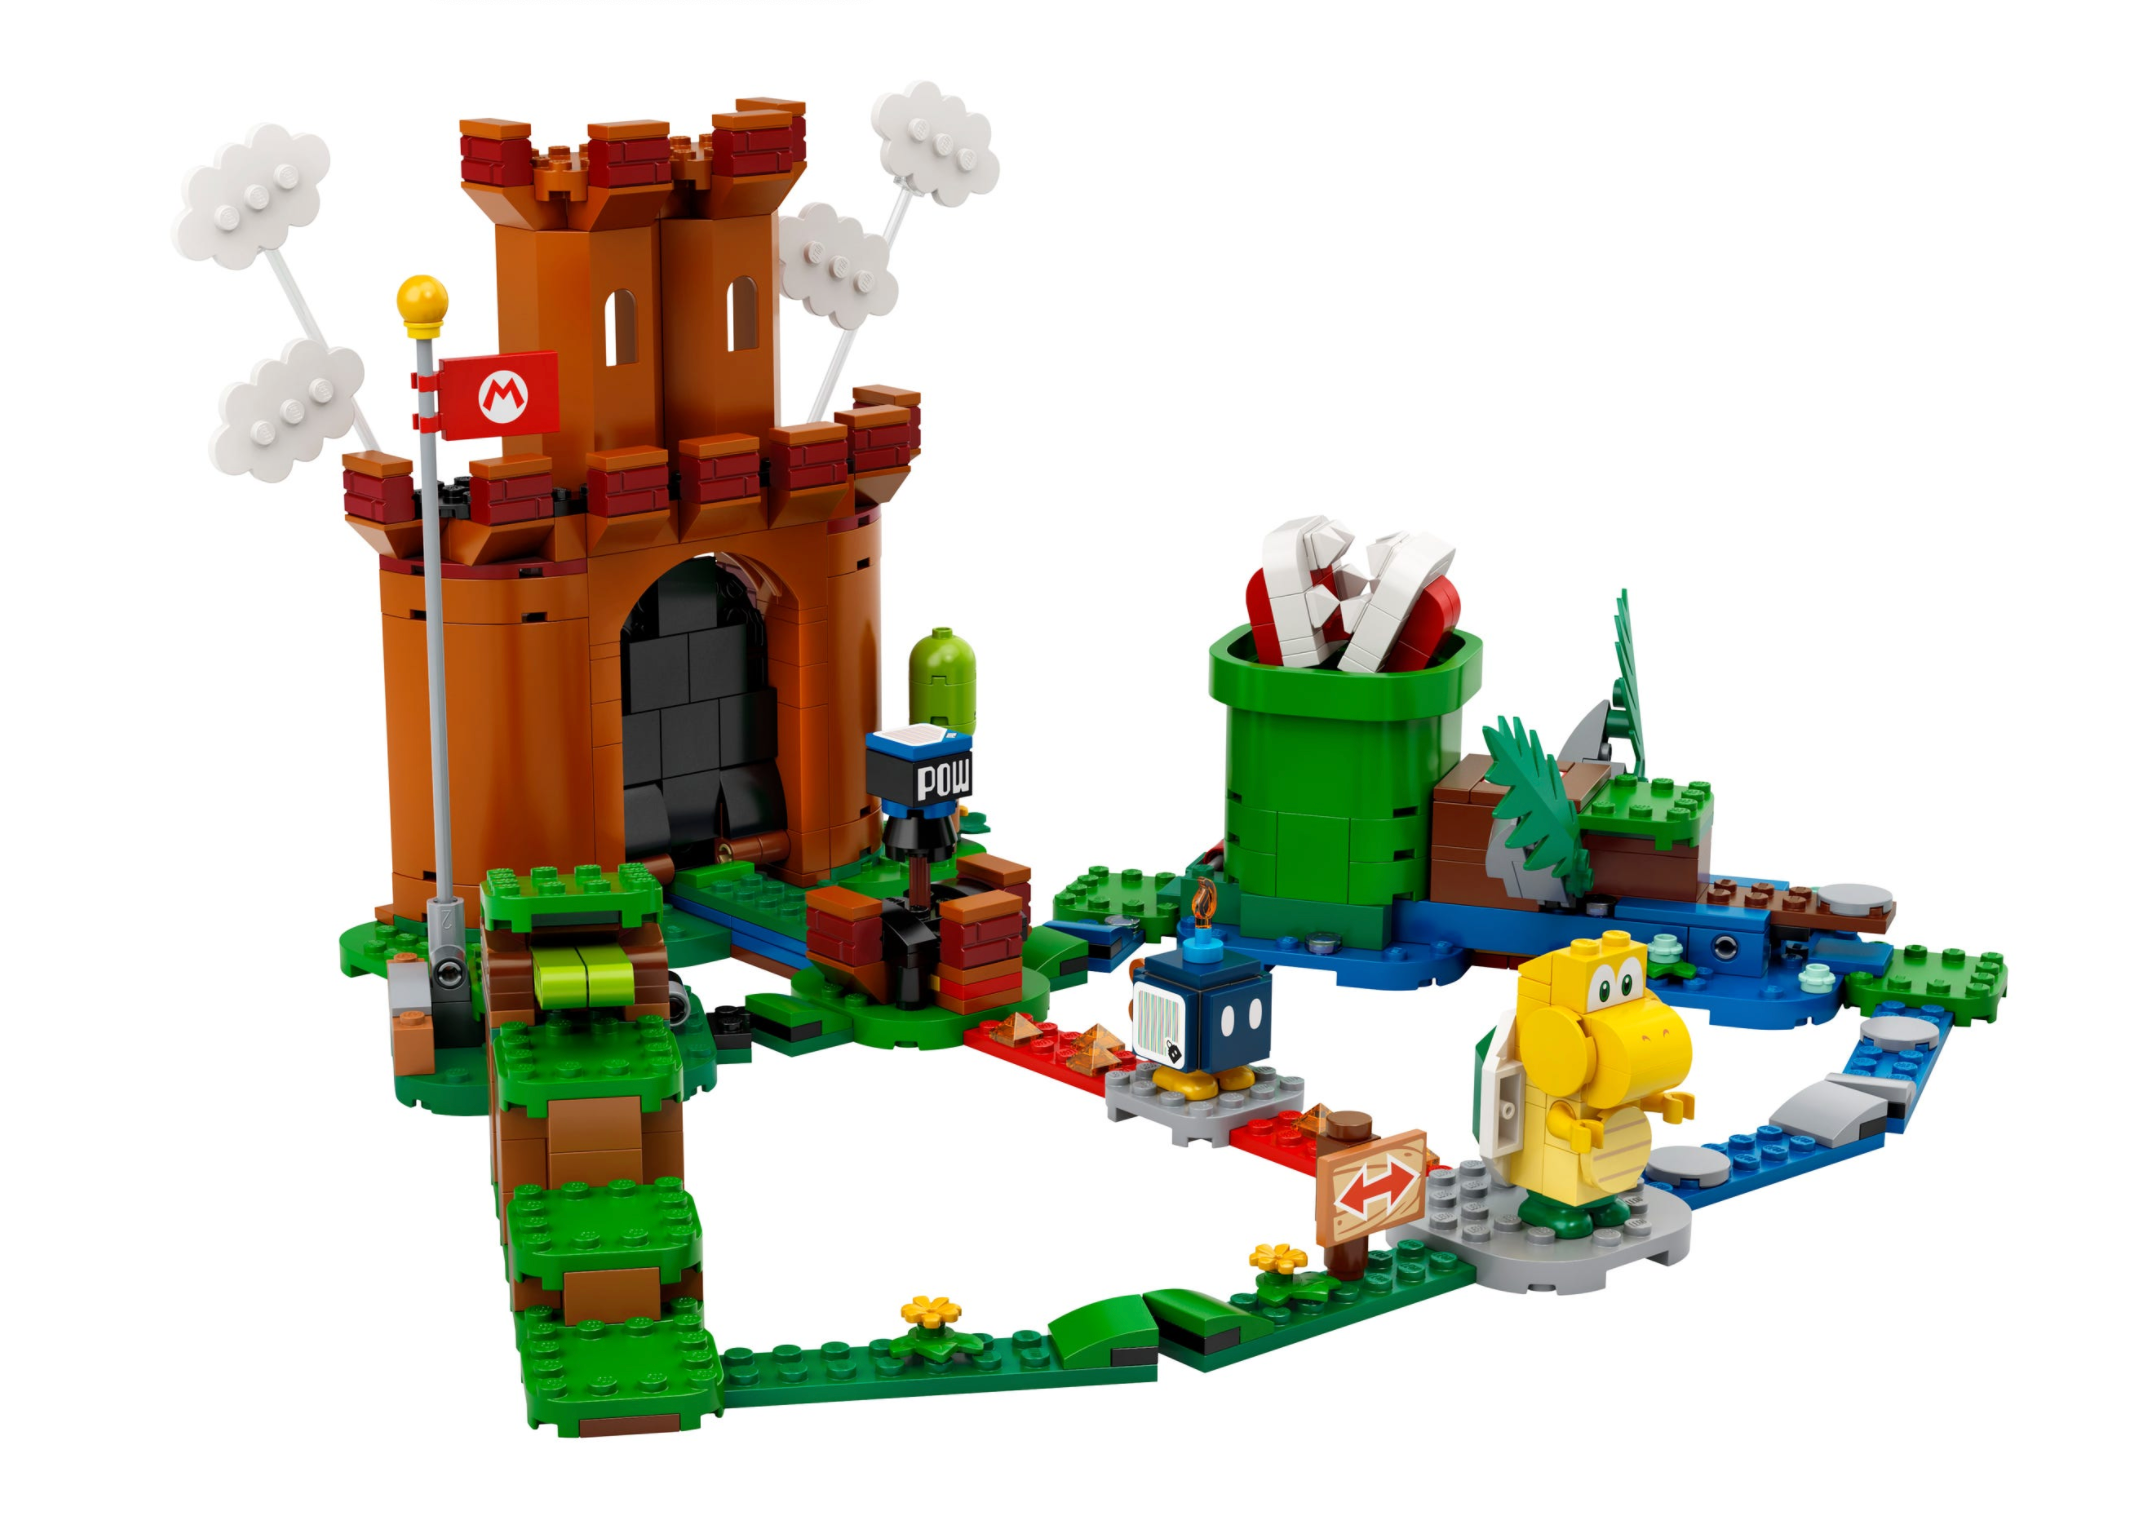 LEGO: Super Mario - Guarded Fortress Expansion Set